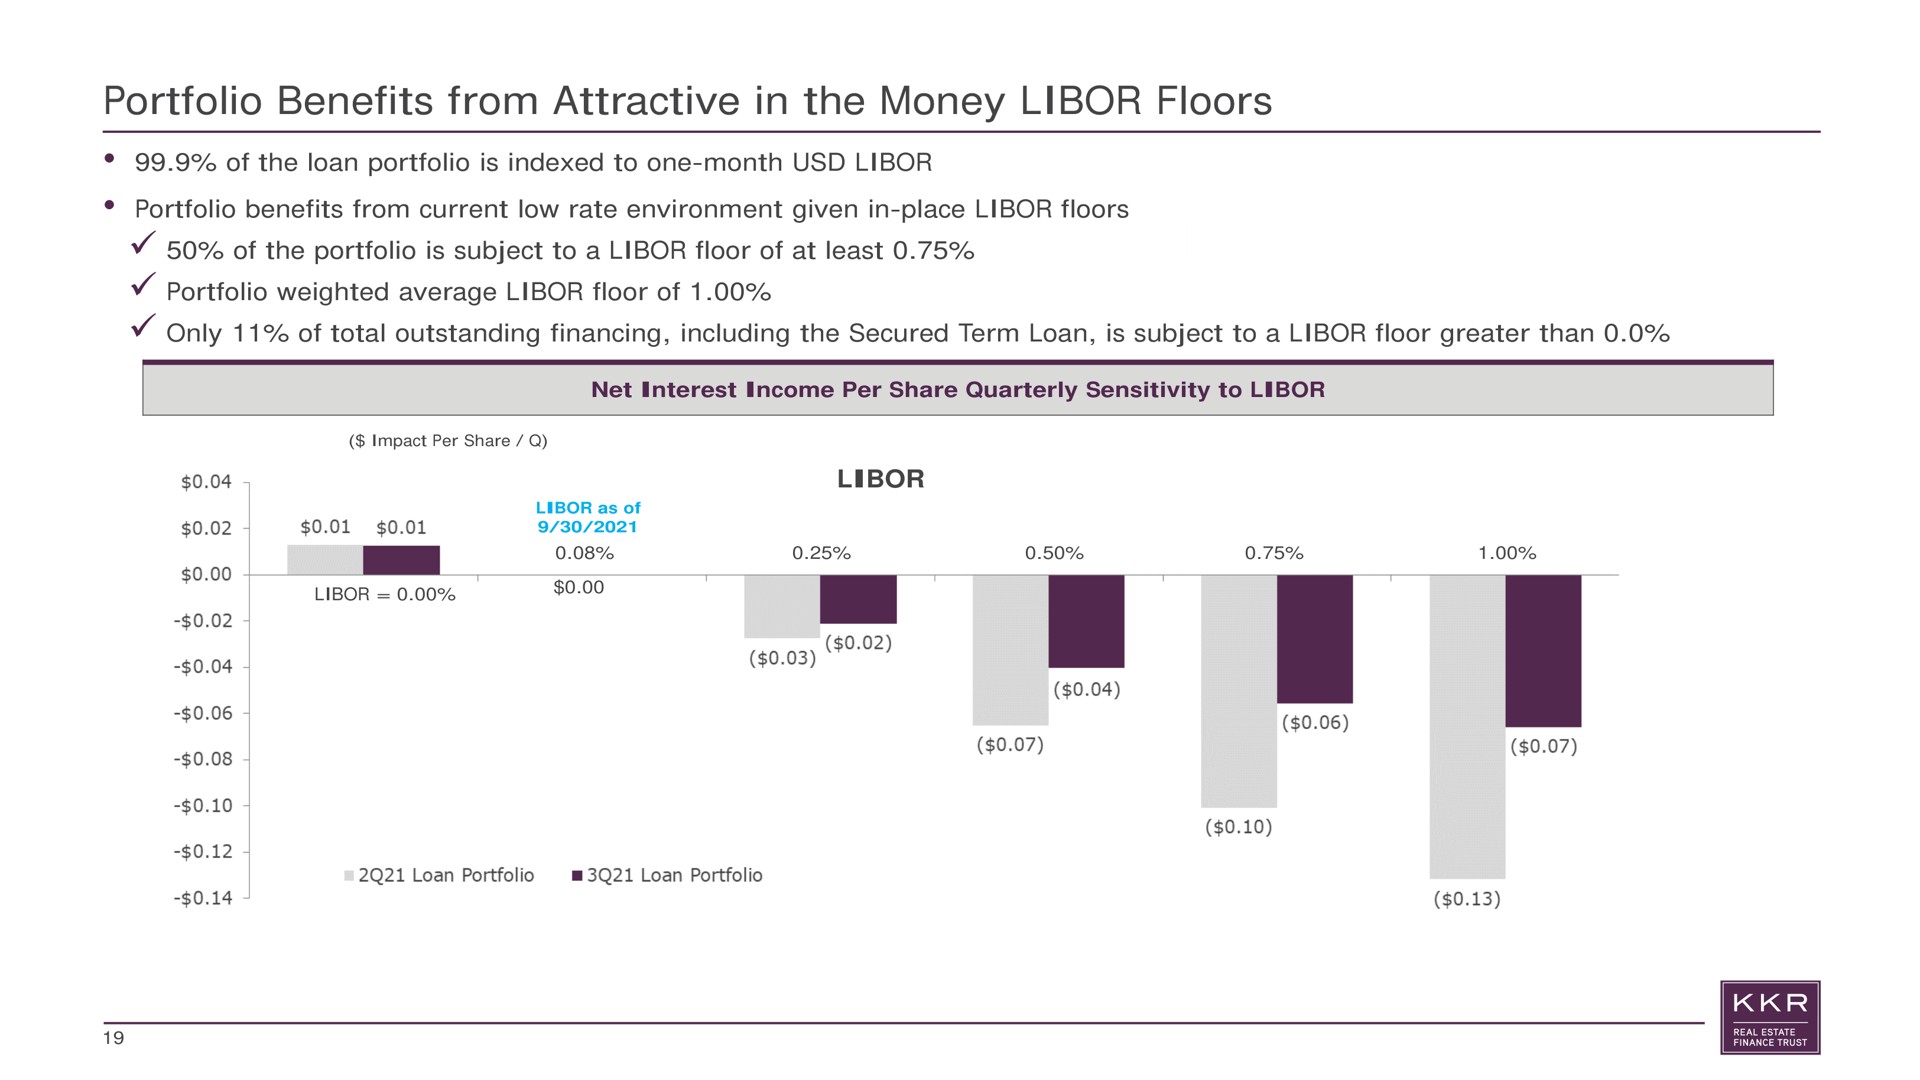 portfolio benefits from attractive in the money floors of the loan portfolio is indexed to one month portfolio benefits from current low rate environment given in place floors of the portfolio is subject to a floor of at least portfolio weighted average floor of only of total outstanding financing including the secured term loan is subject to a floor greater than net interest income per share quarterly sensitivity to | KKR Real Estate Finance Trust